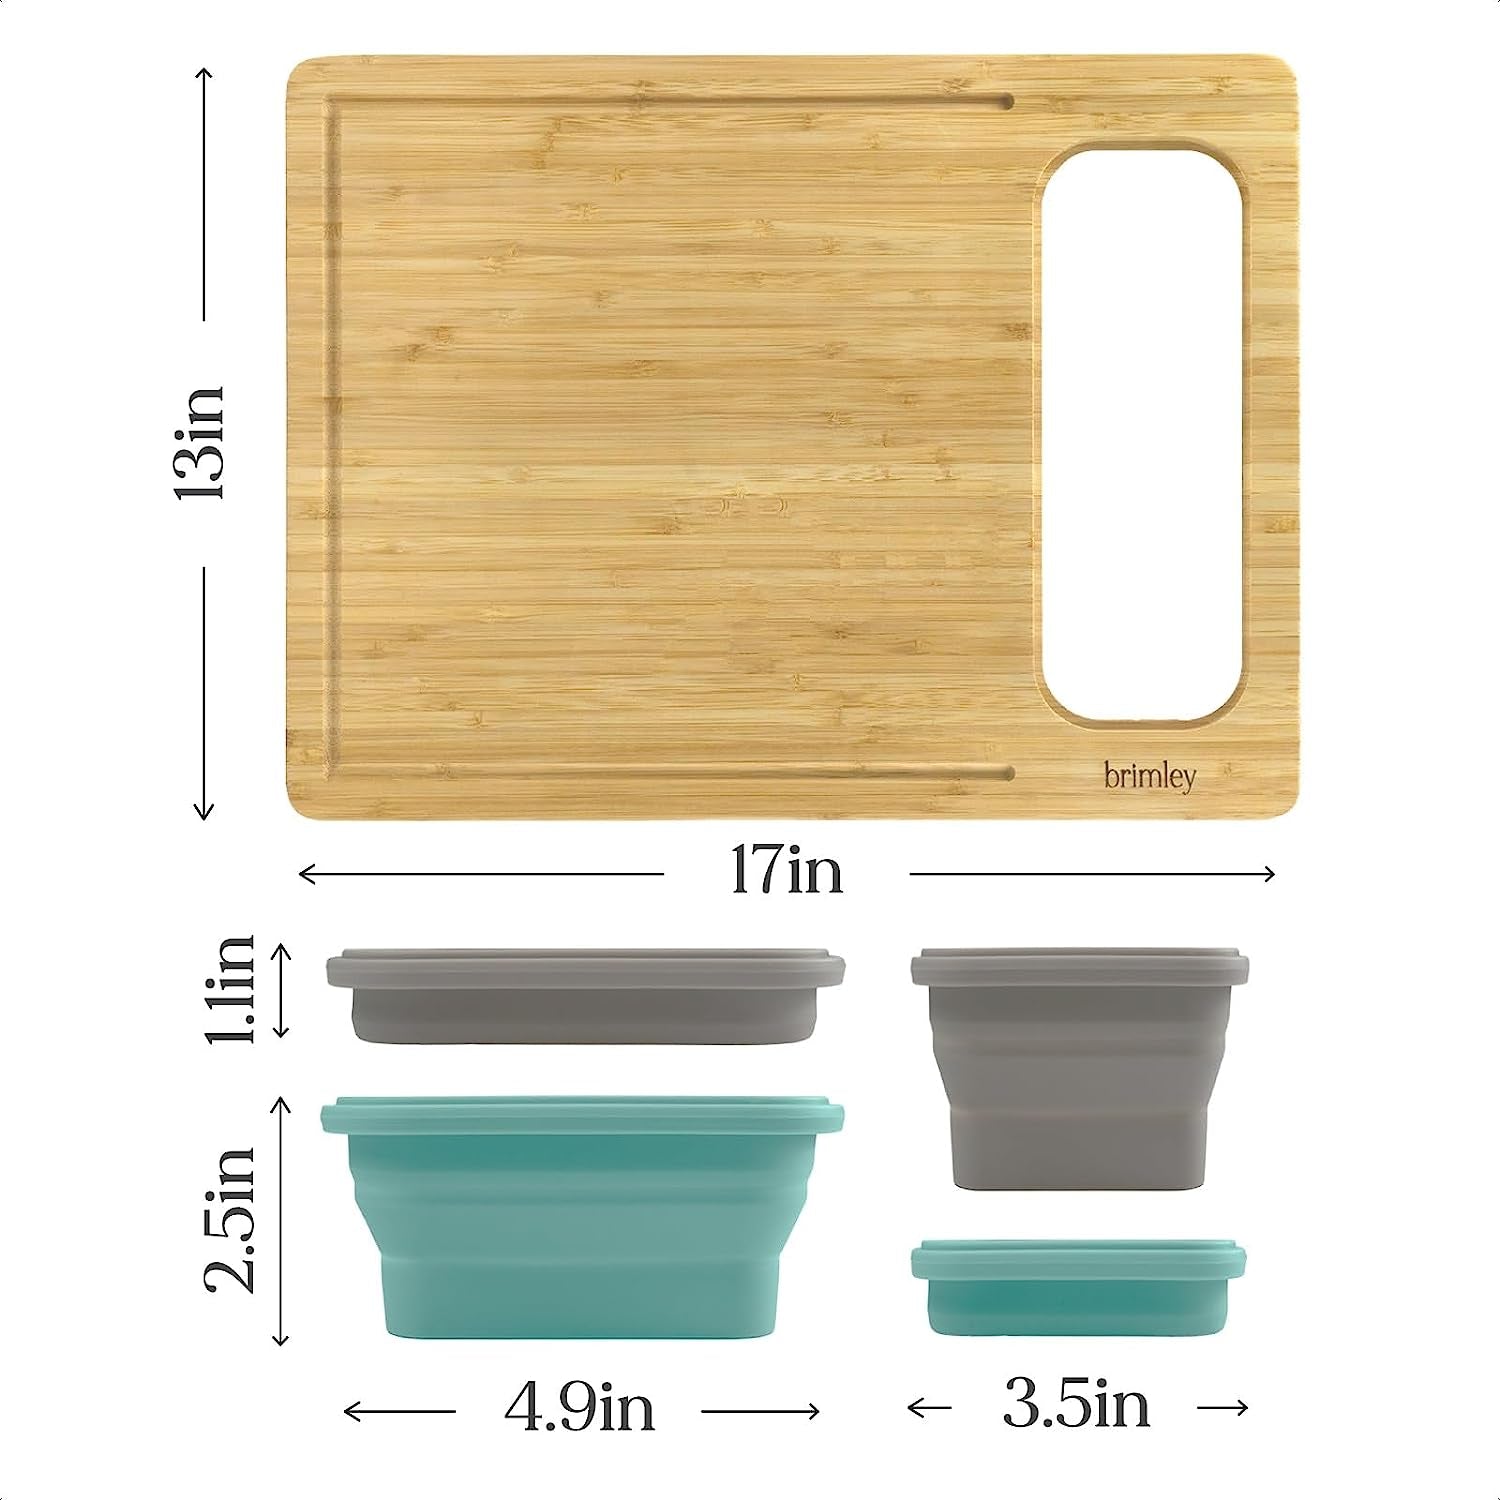 Bamboo Wood Cutting Board - Wooden Cutting Board with Containers and Lids for Food Storage - over Edge Hanging Cutting Boards for Kitchen with Anti-Slip Feet - Home and Kitchen Gadgets